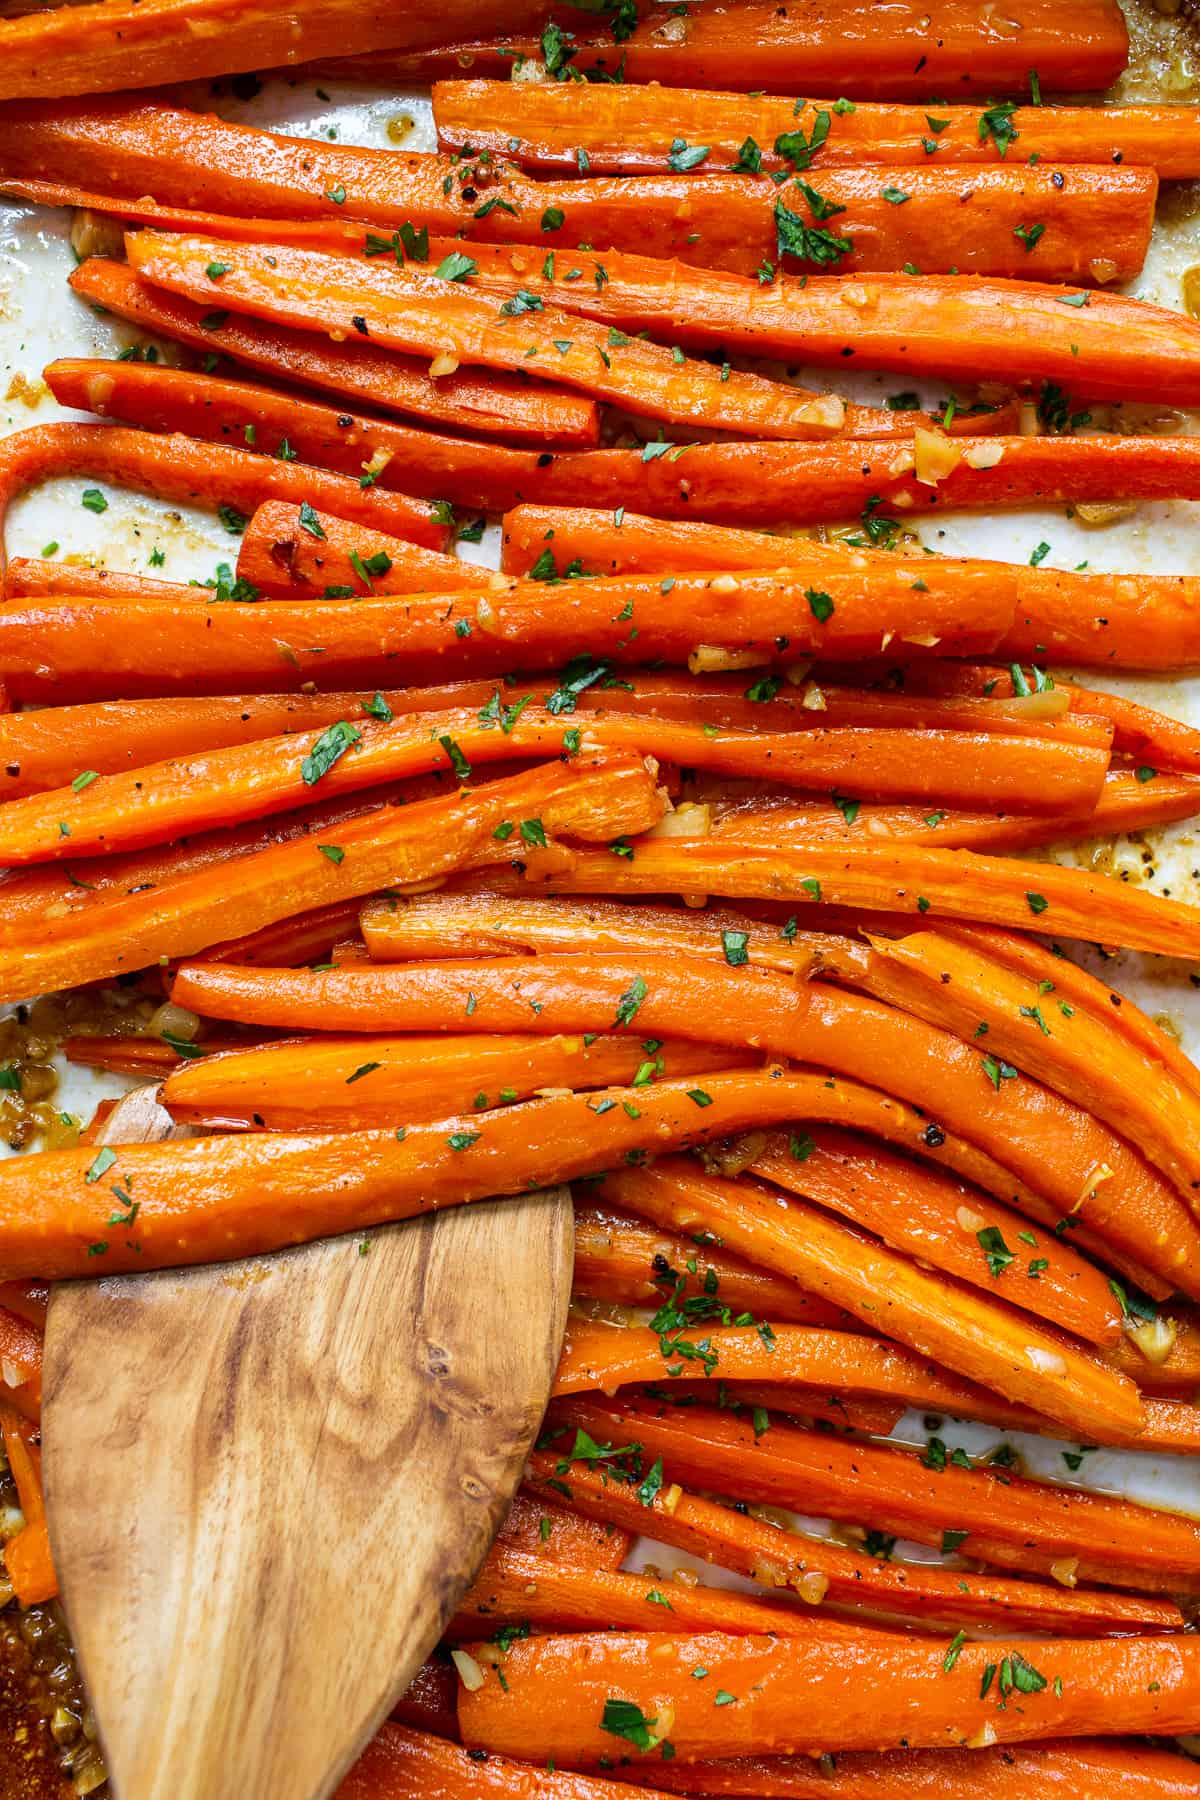 Garlic glazed carrots topped with parsley.